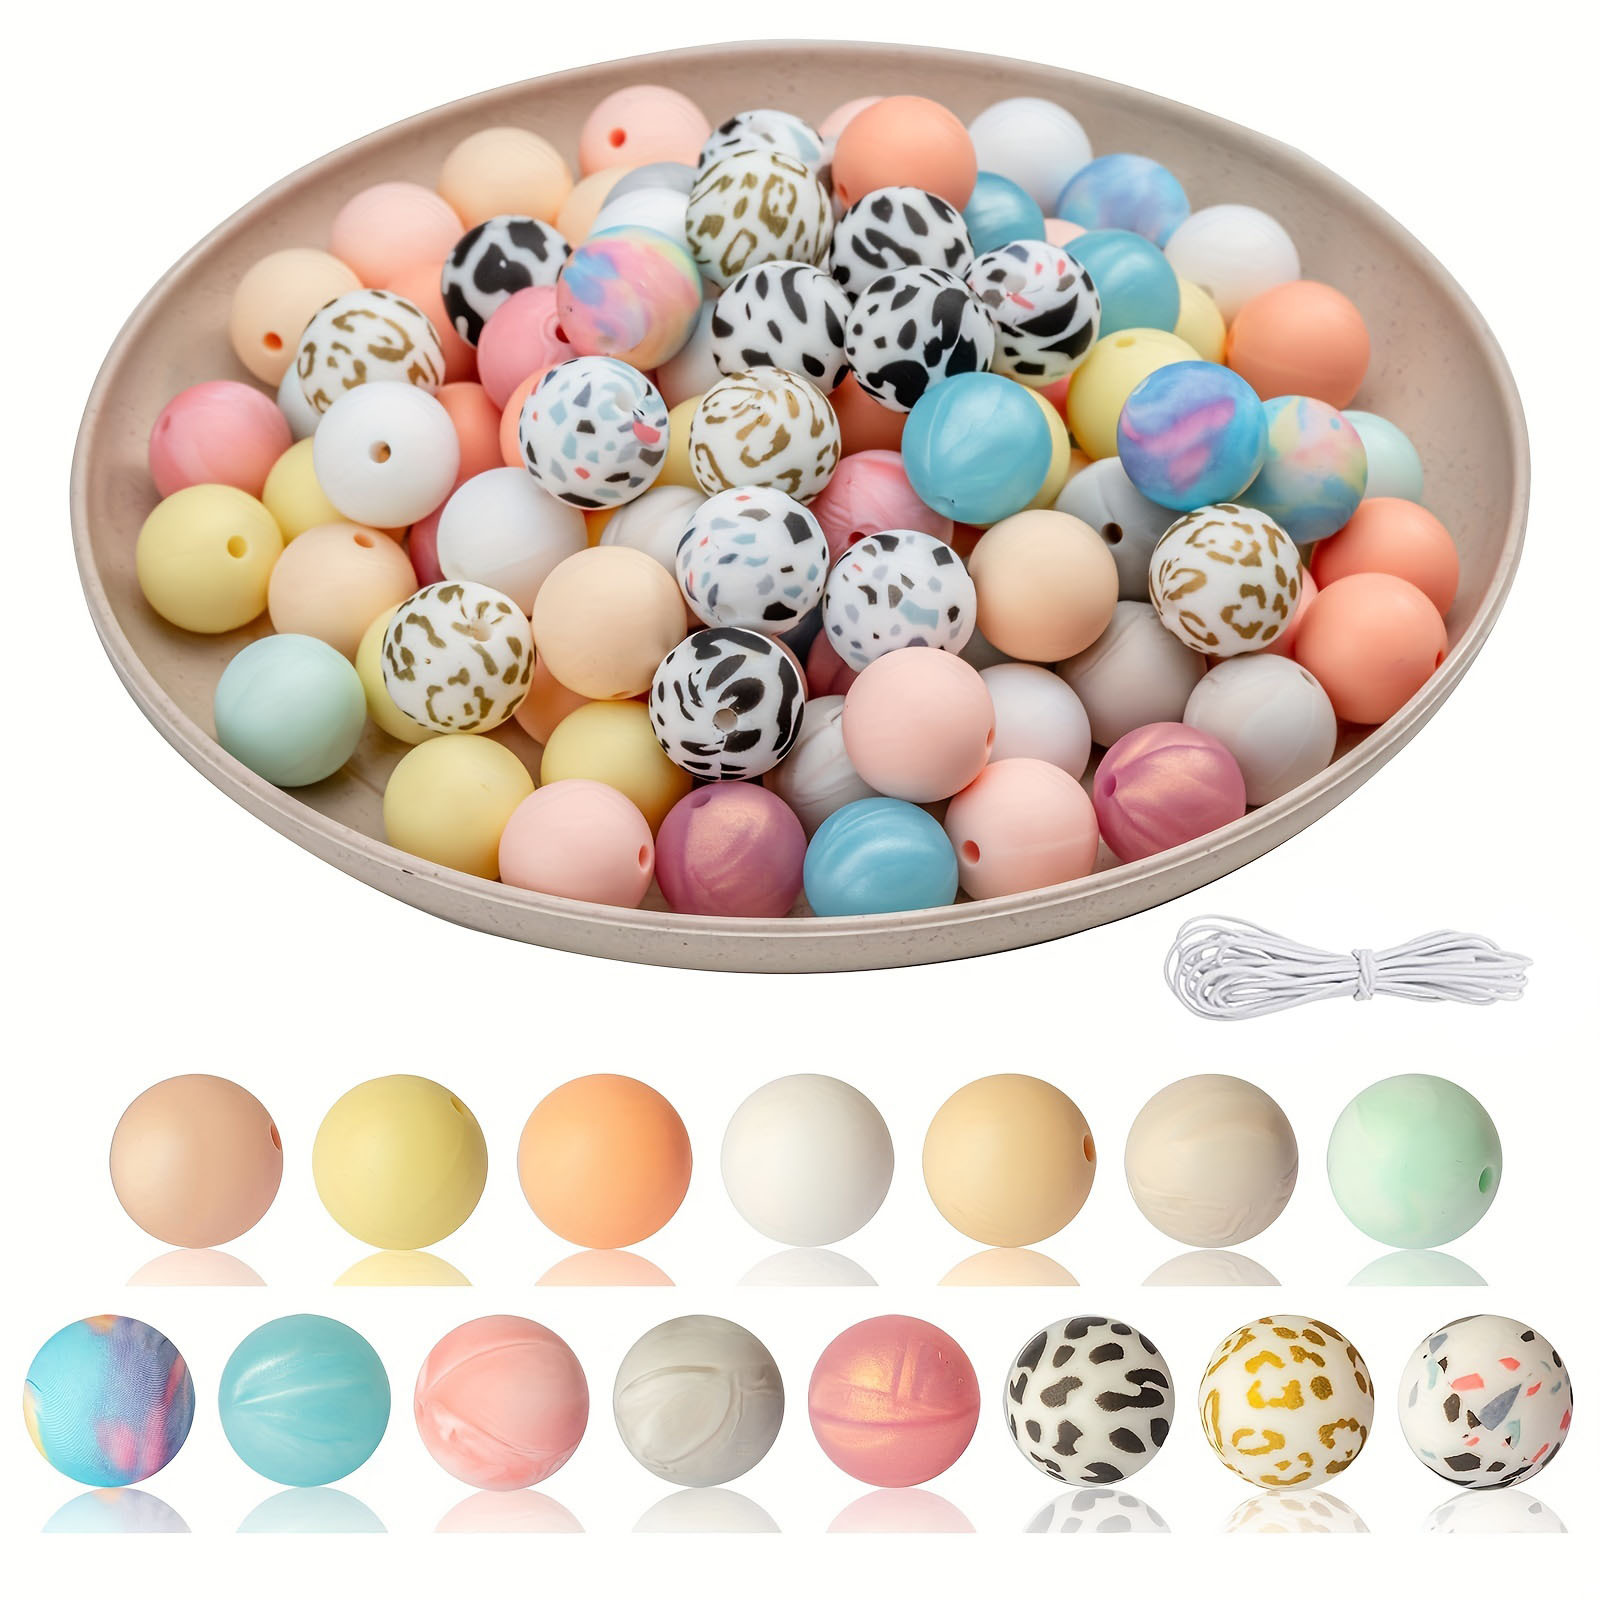 100pcs 15mm Round Silicone Bead Kit, For Necklace, Bracelet, Diy Craft  Making - Assorted Silicone Color Beads - For Jewelry Making